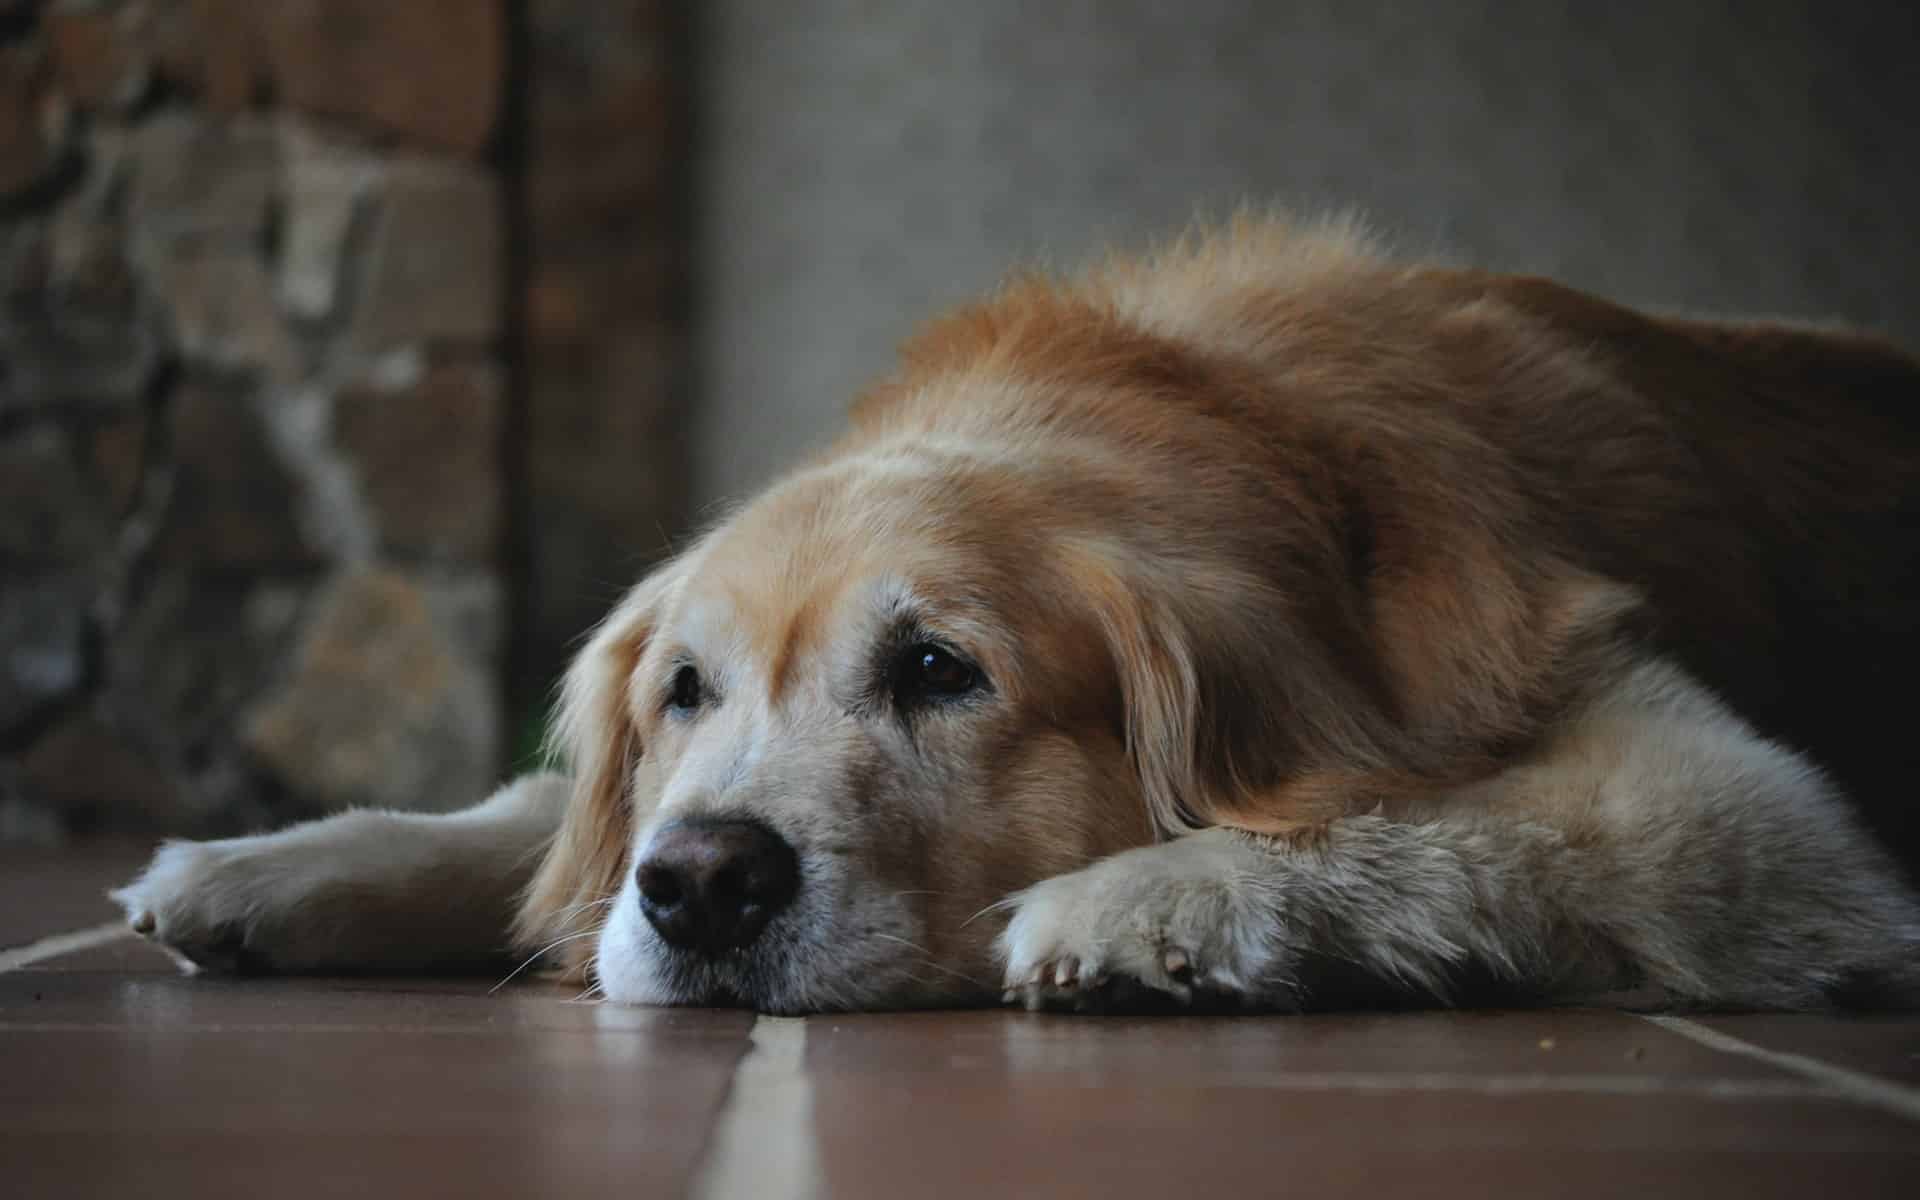 An old labrador retriever laying on the floor